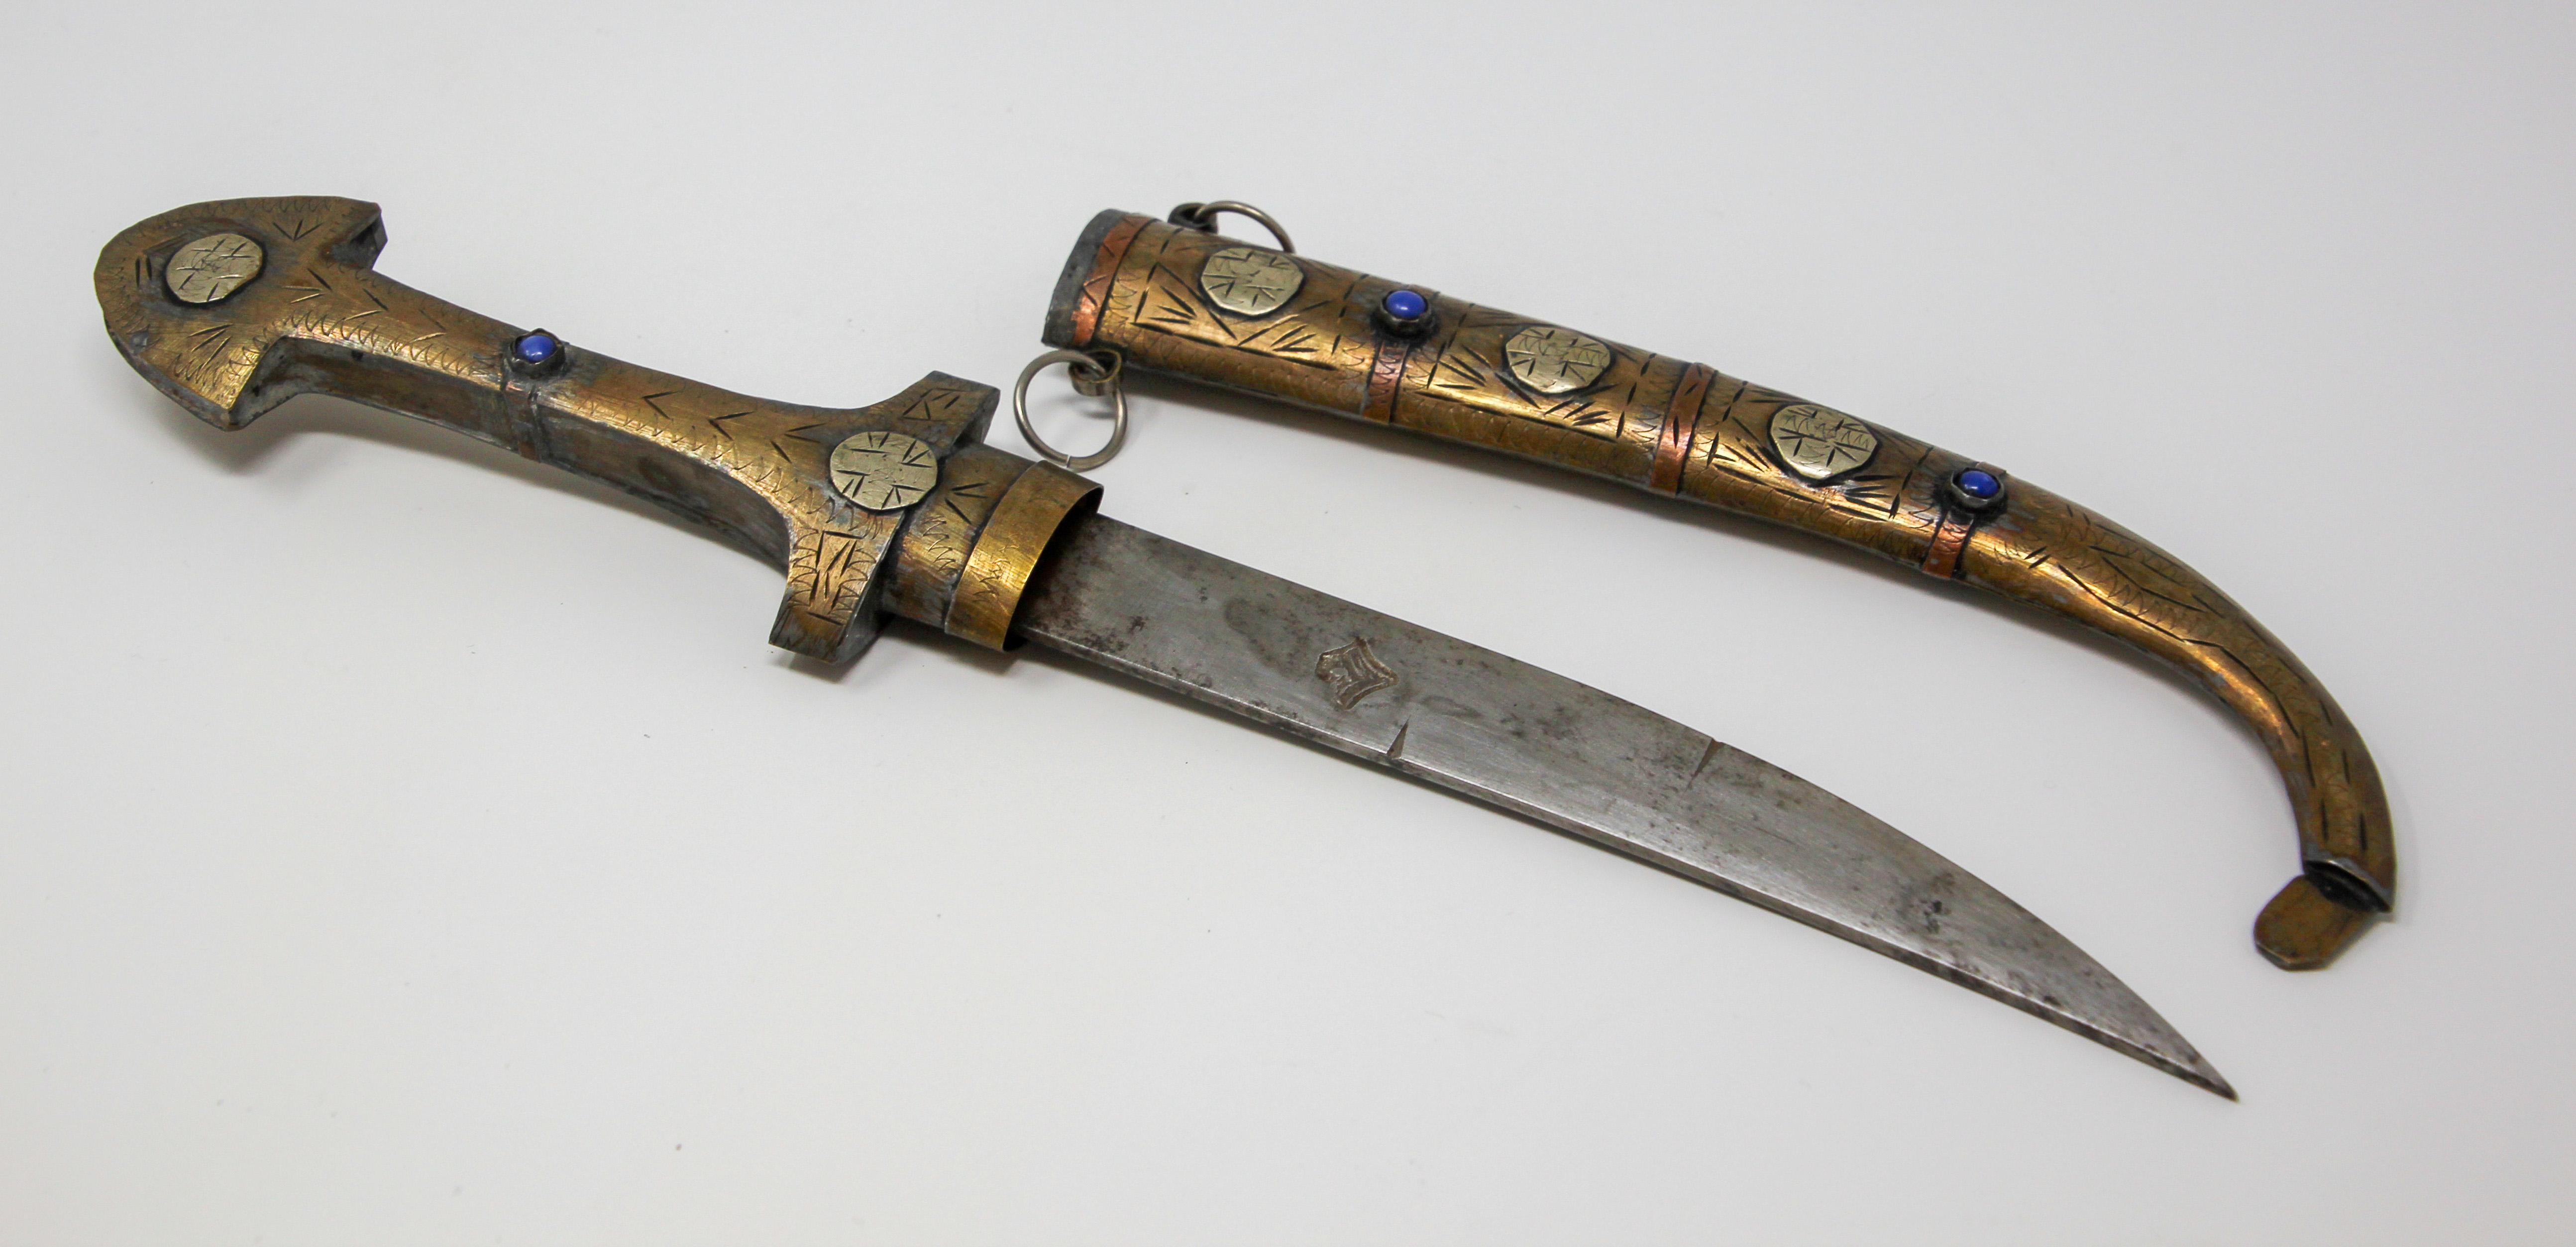 Handcrafted Moroccan brass dagger, mixed metal, copper, nickel and enamel.
Moroccan Hand carved Khoumiya dagger, of typical shape with curved blade, with brass fittings, complete with scabbard with tribal Berber motifs. 
Handcrafted by artisans in